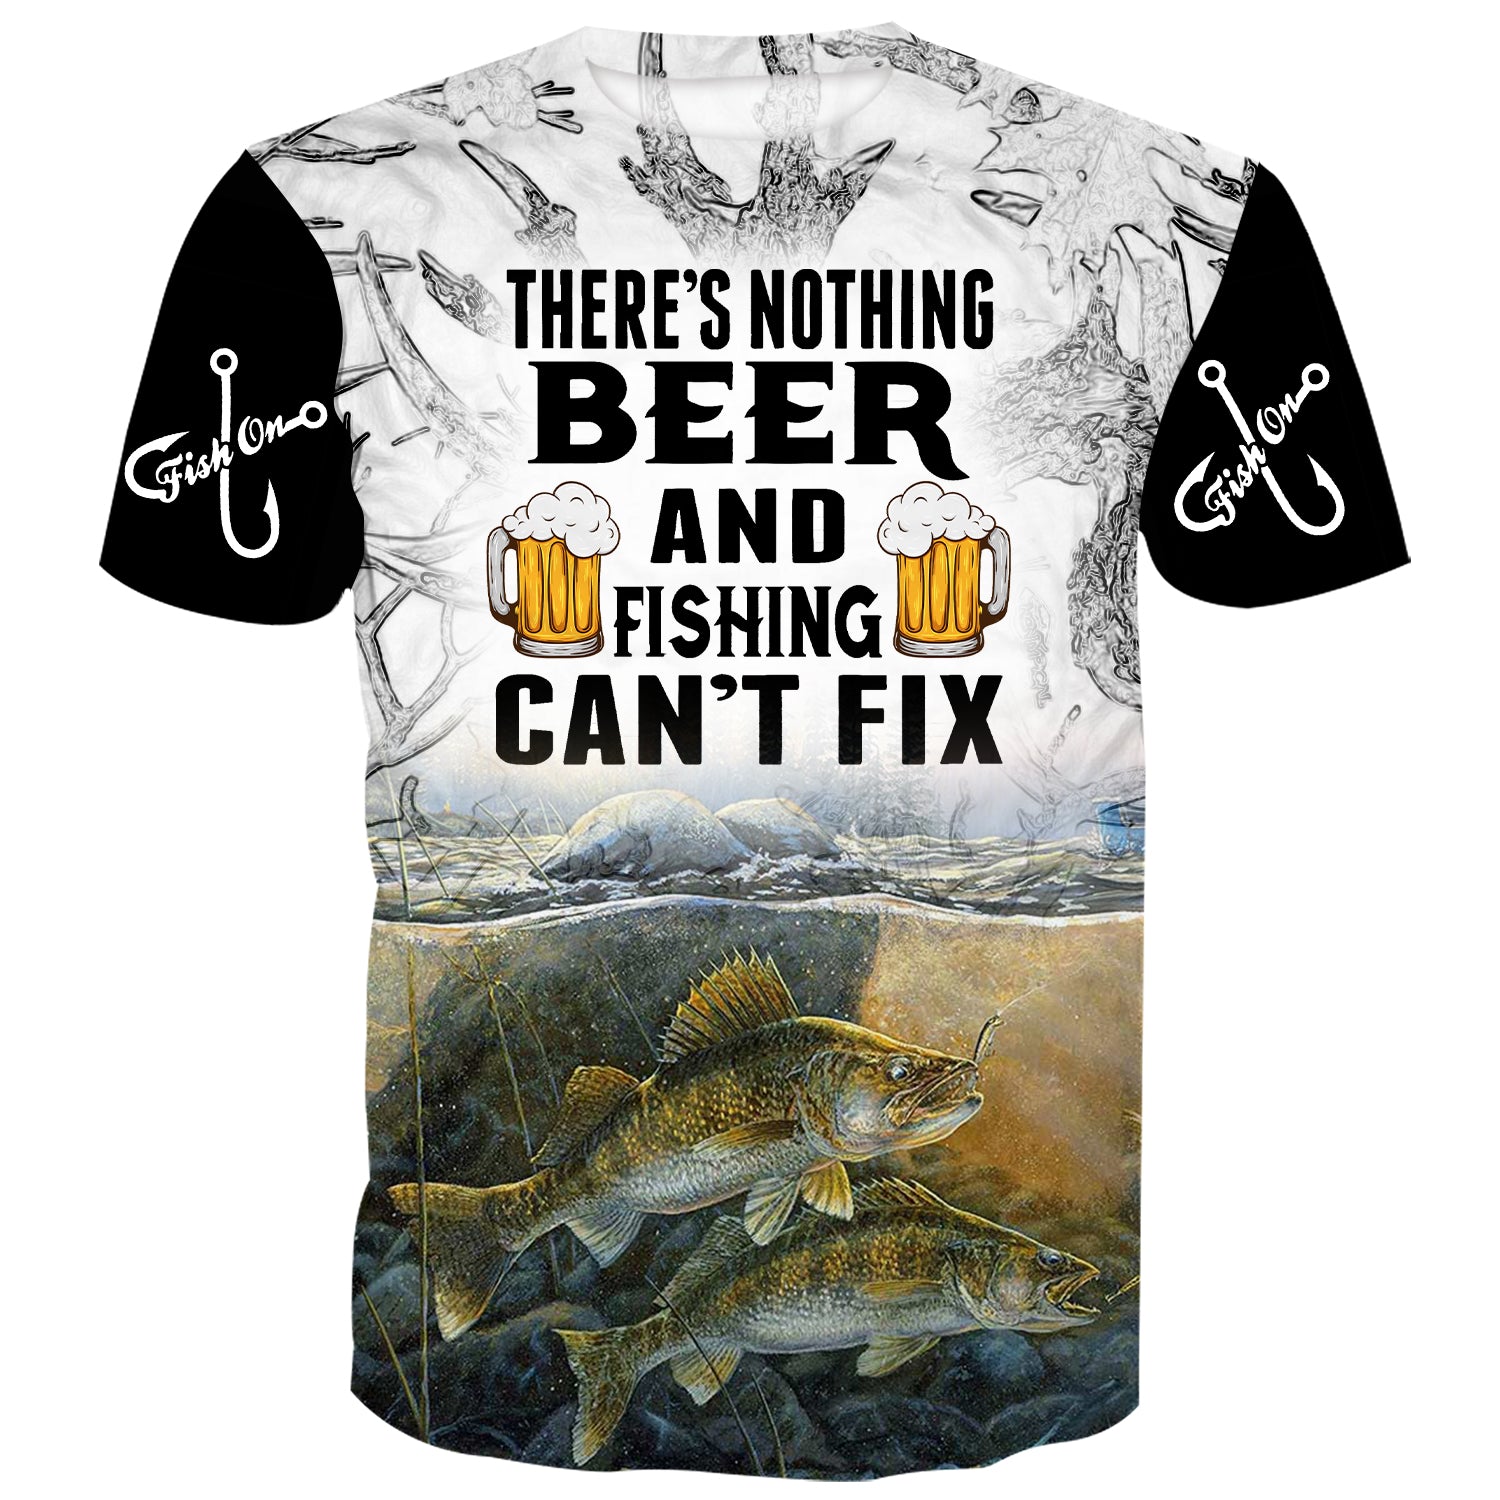 There's nothing beer and fishing can't fix - Walleye T-Shirt